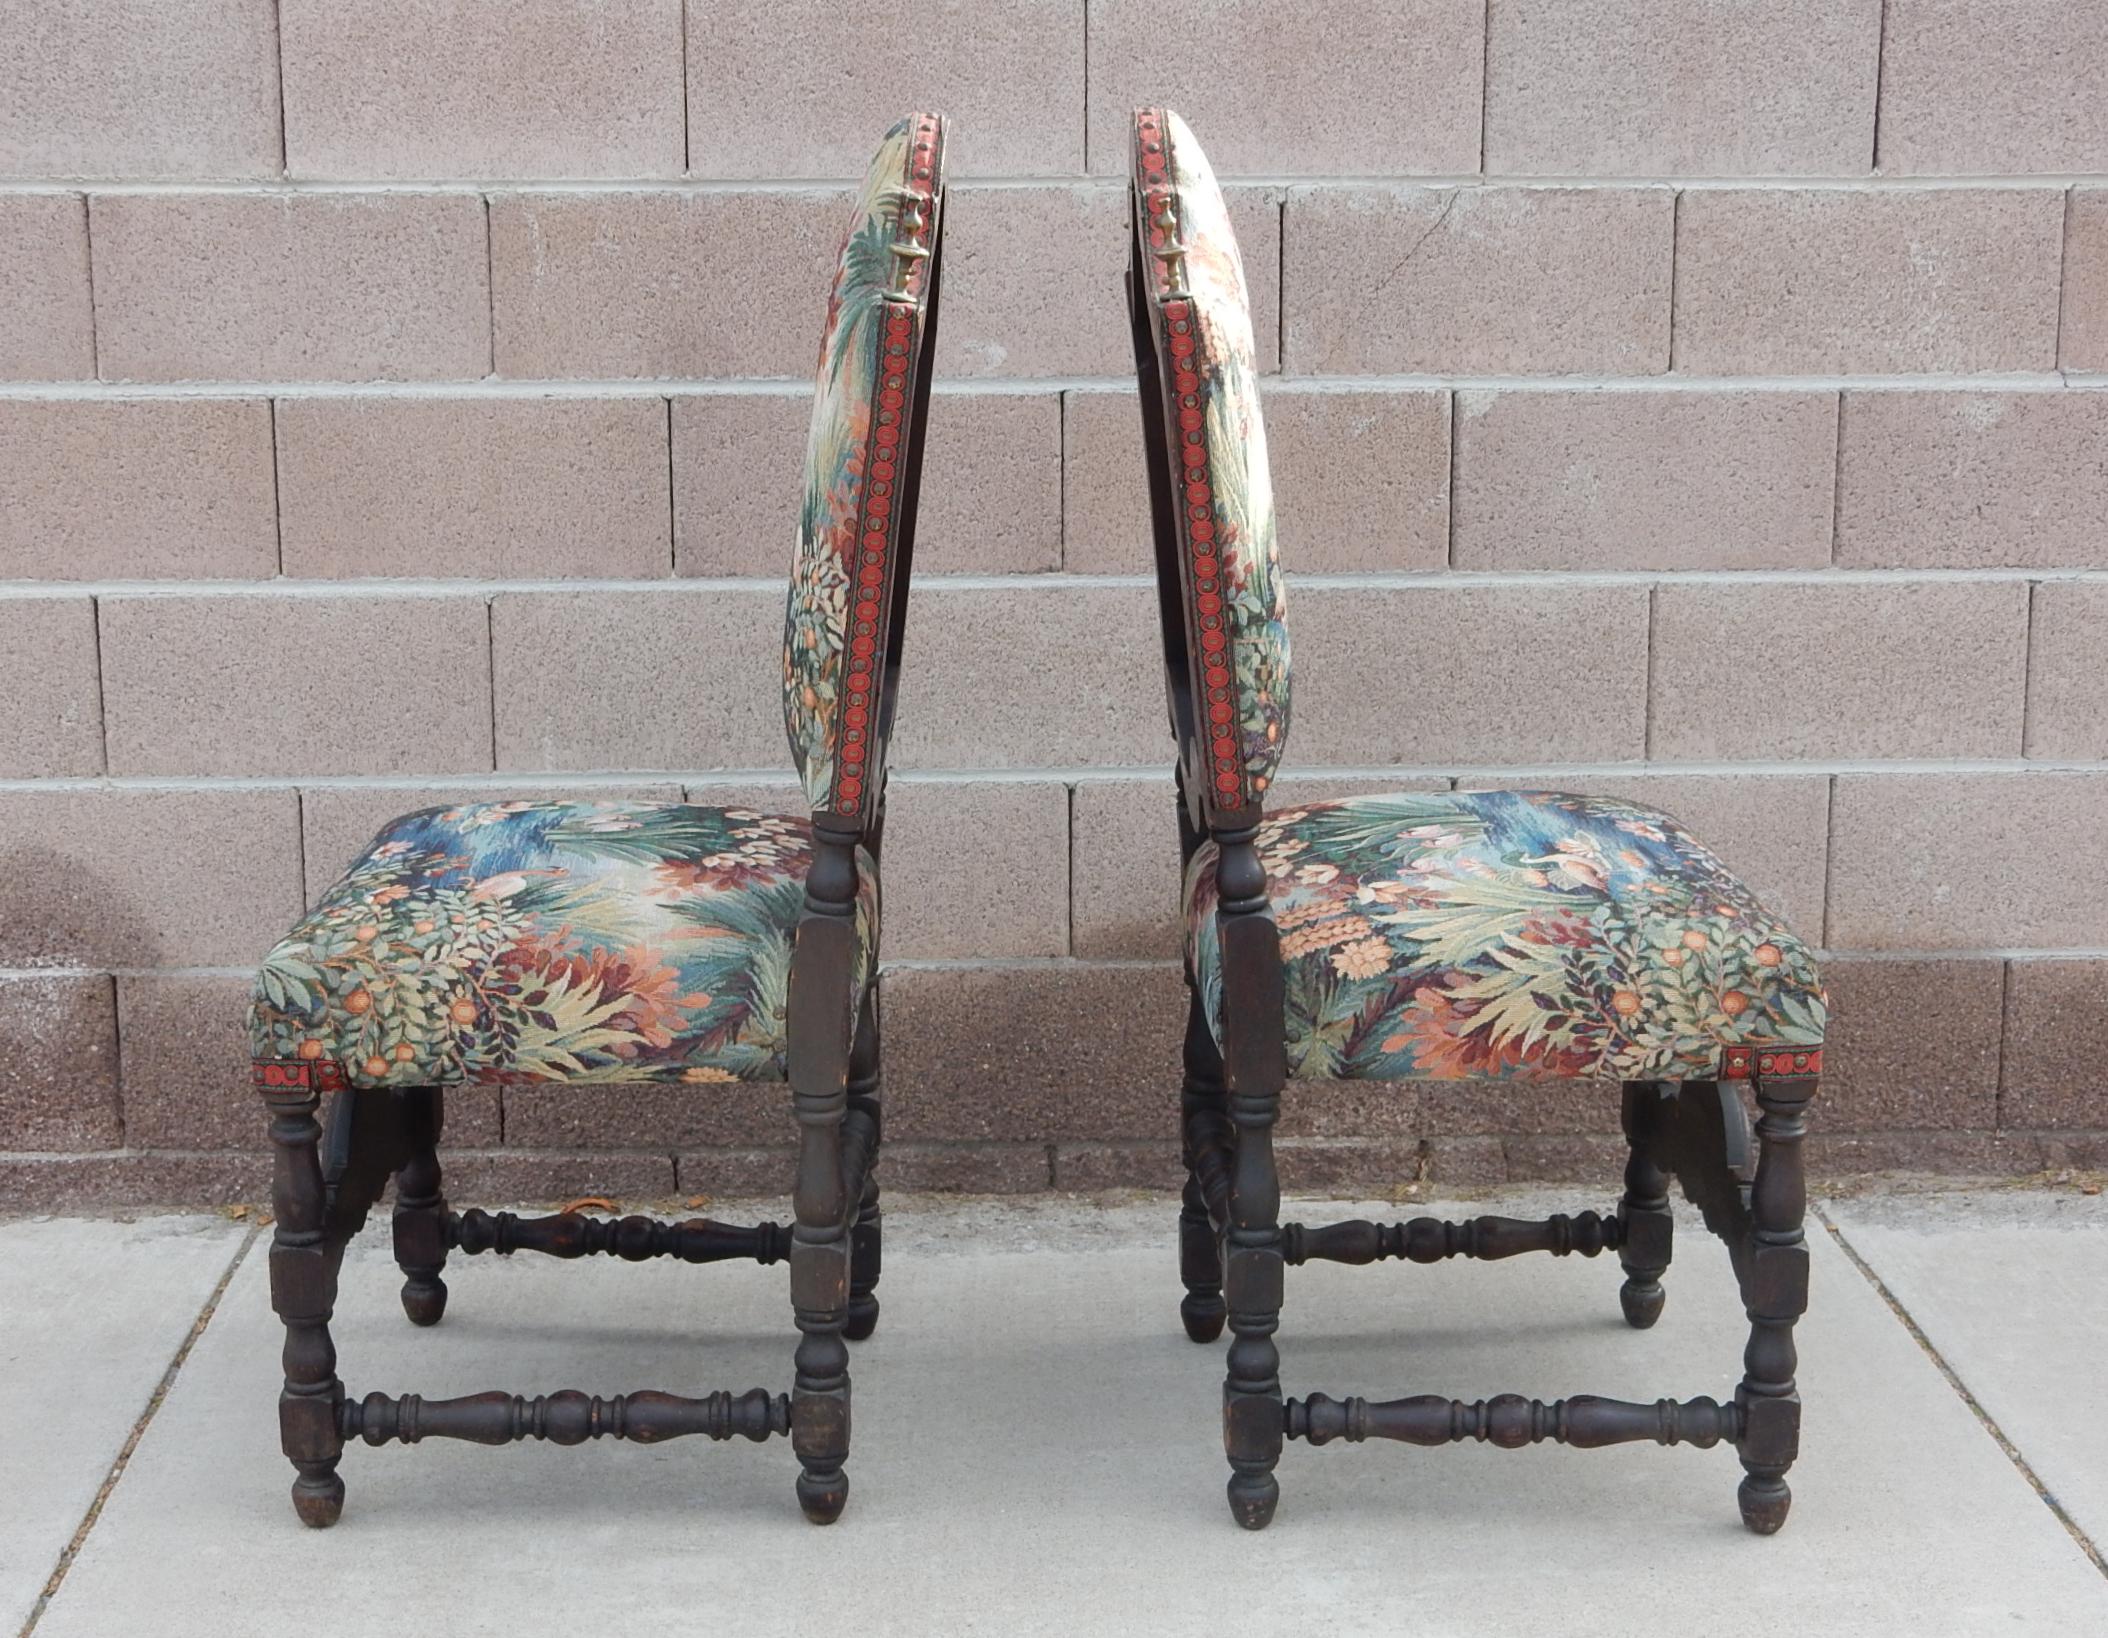 1940's Spanish Colonial Revival Chairs Dressed in Flamingo Garden Upholstery 2